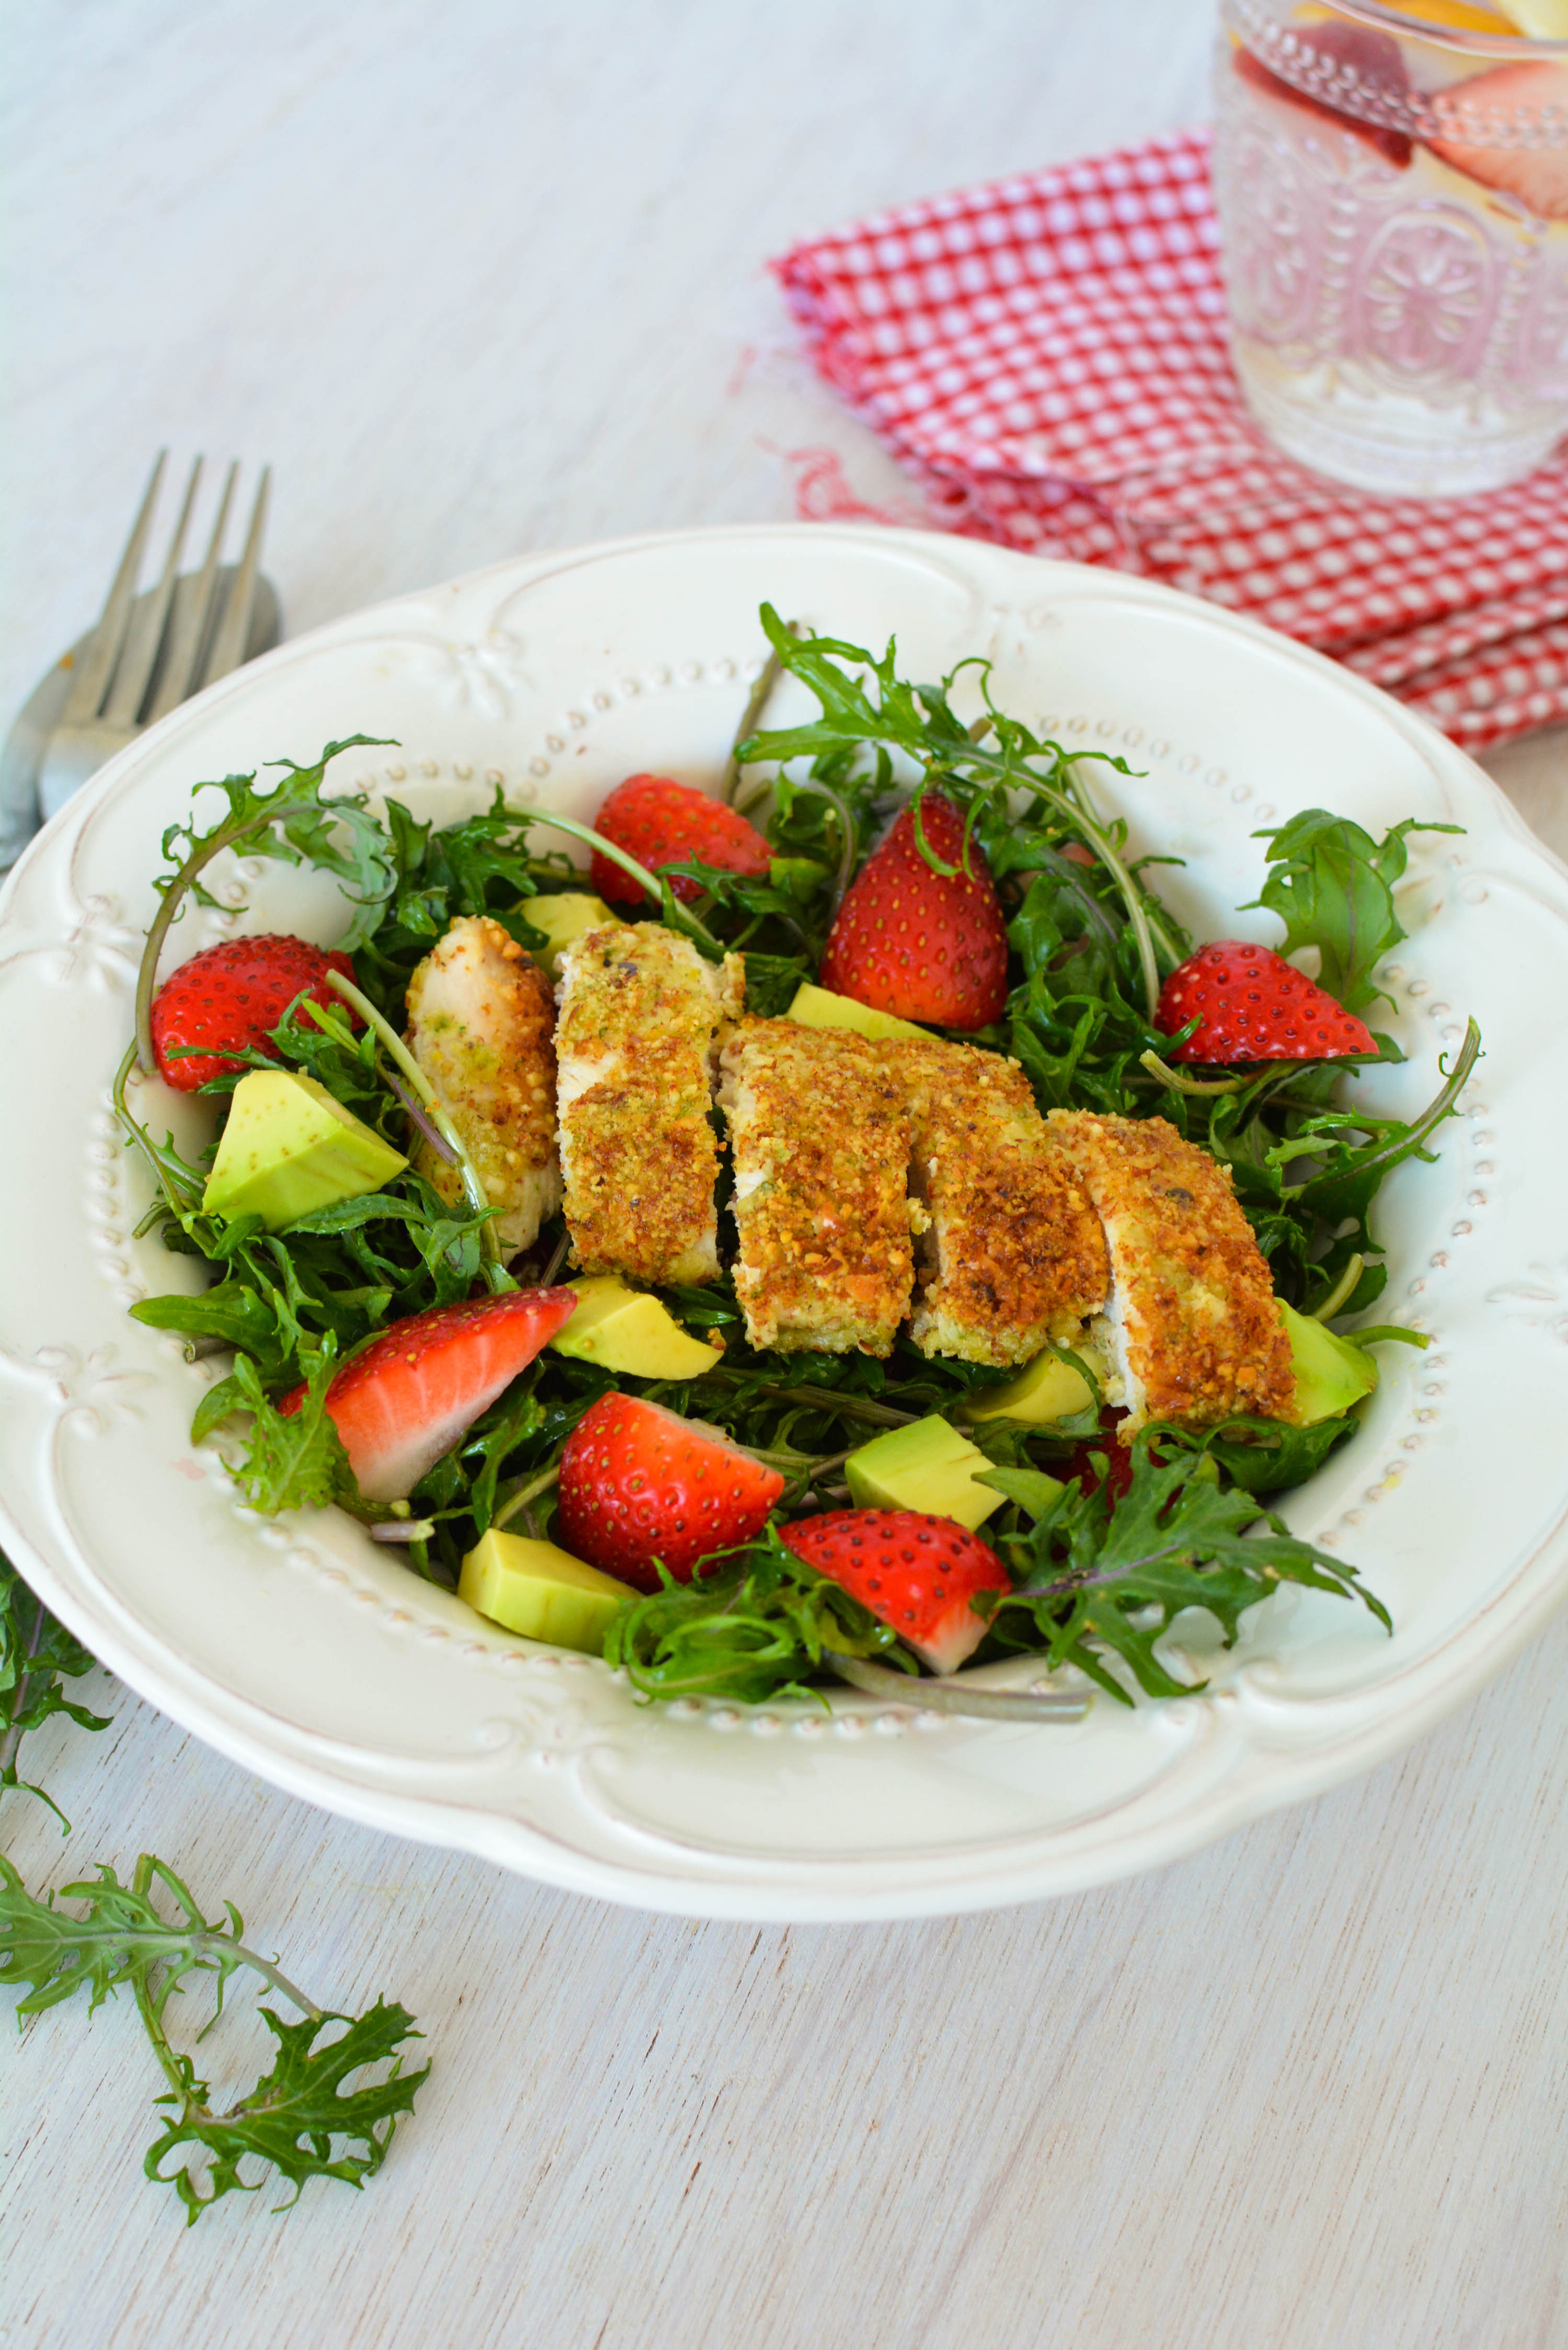 Almond Crusted Chicken with Strawberry Salad